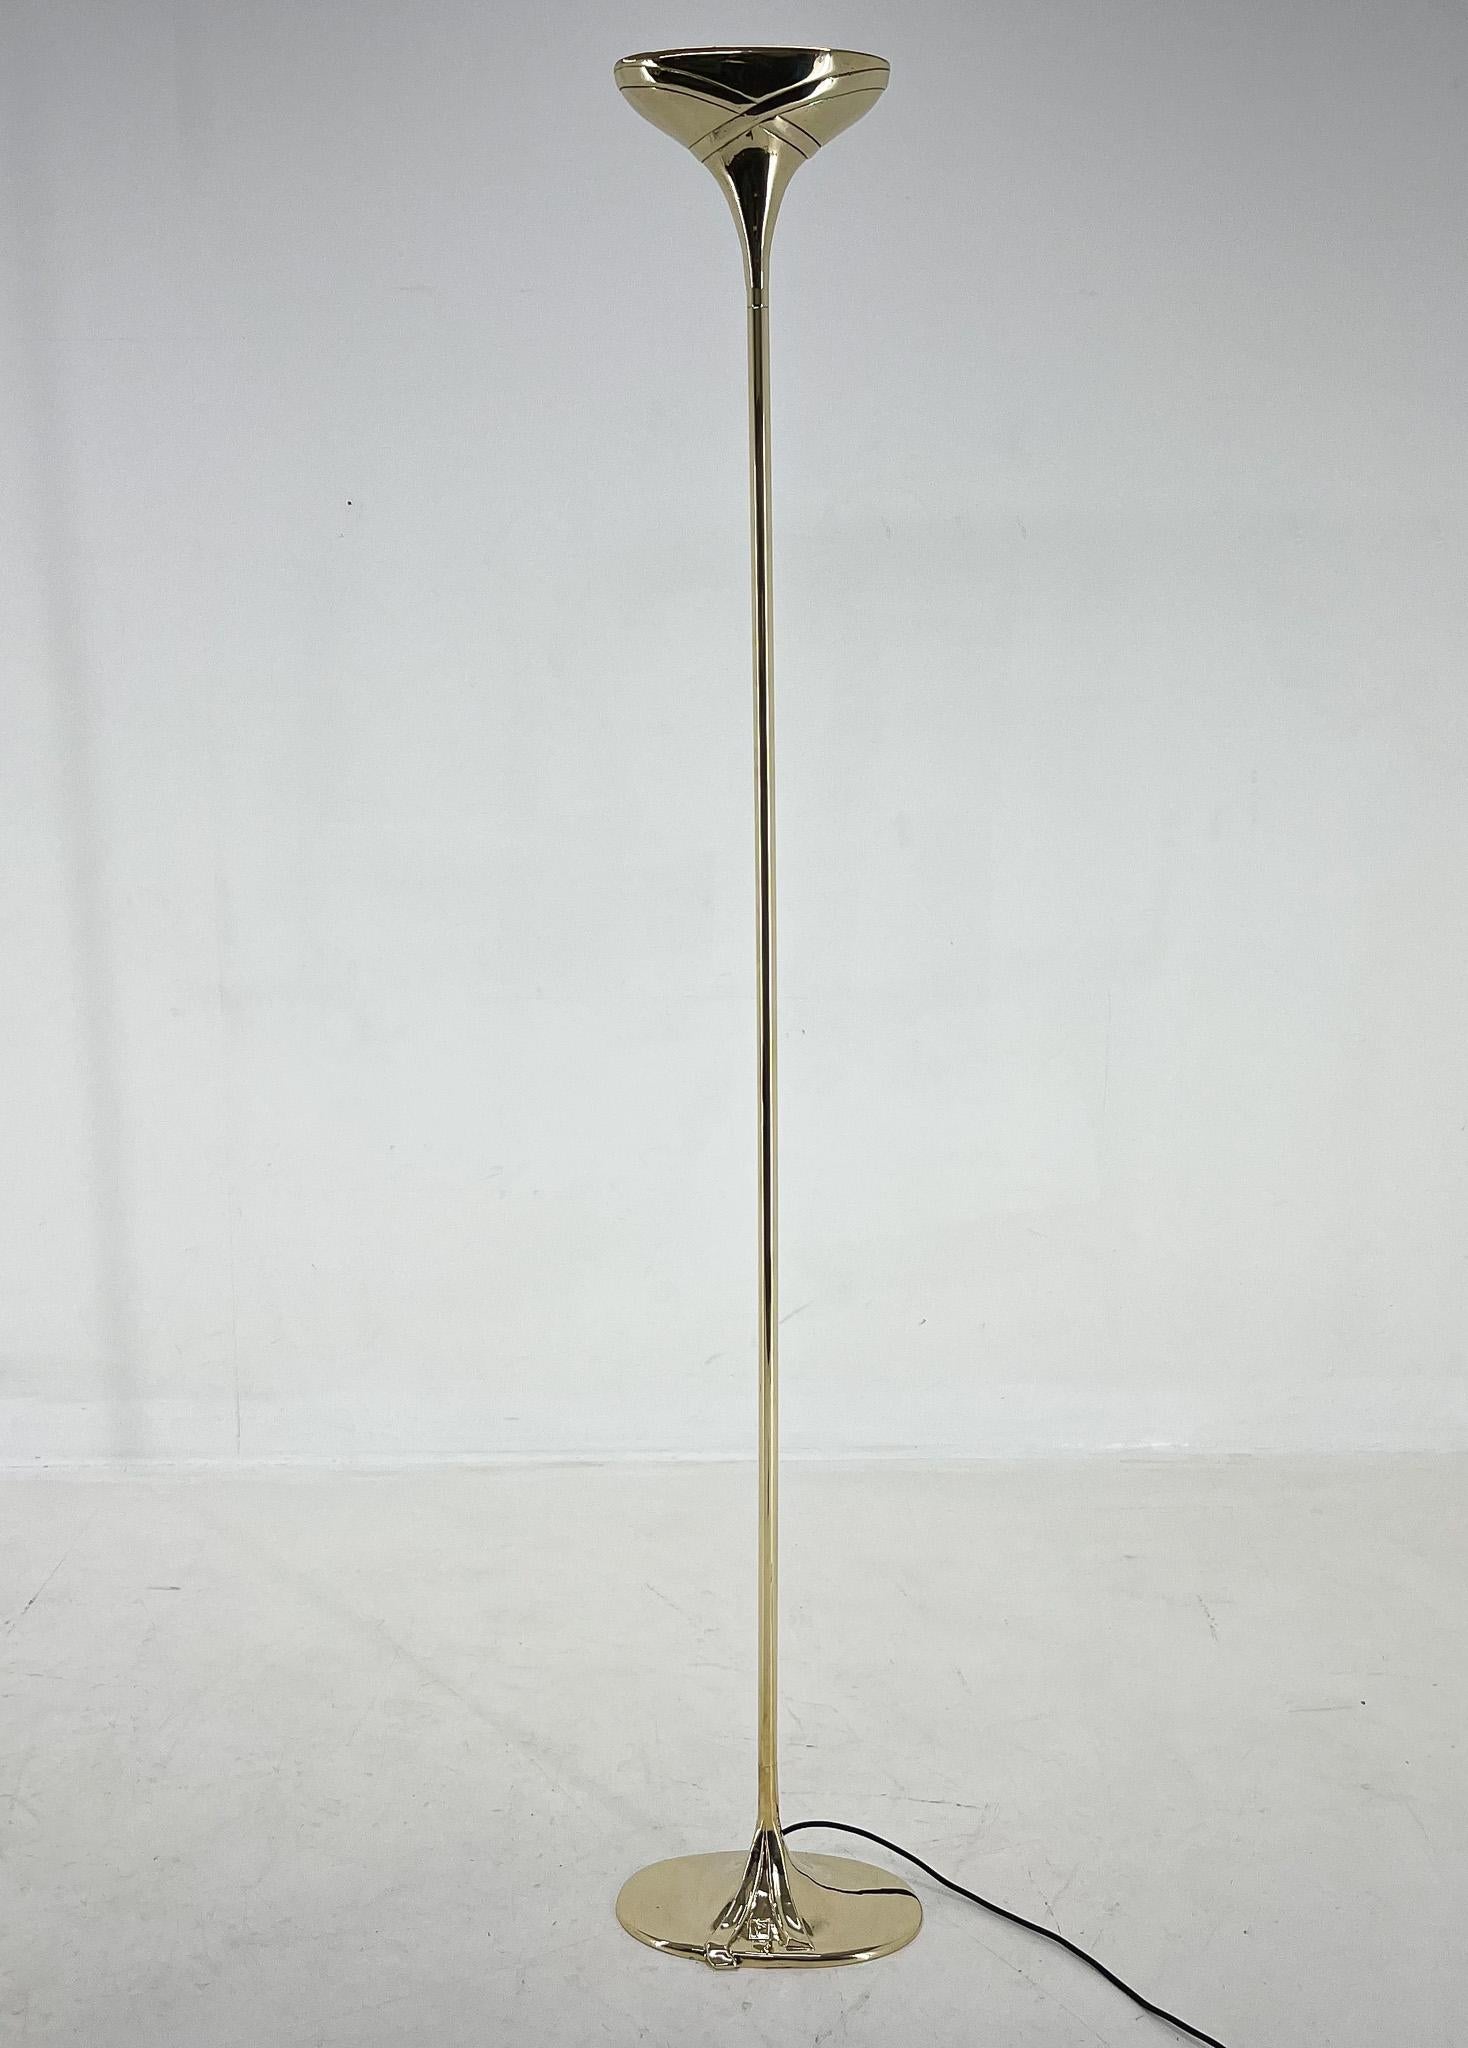 All-brass floor lamp, made in Italy in the 1970's. Marked with the designer's mark.